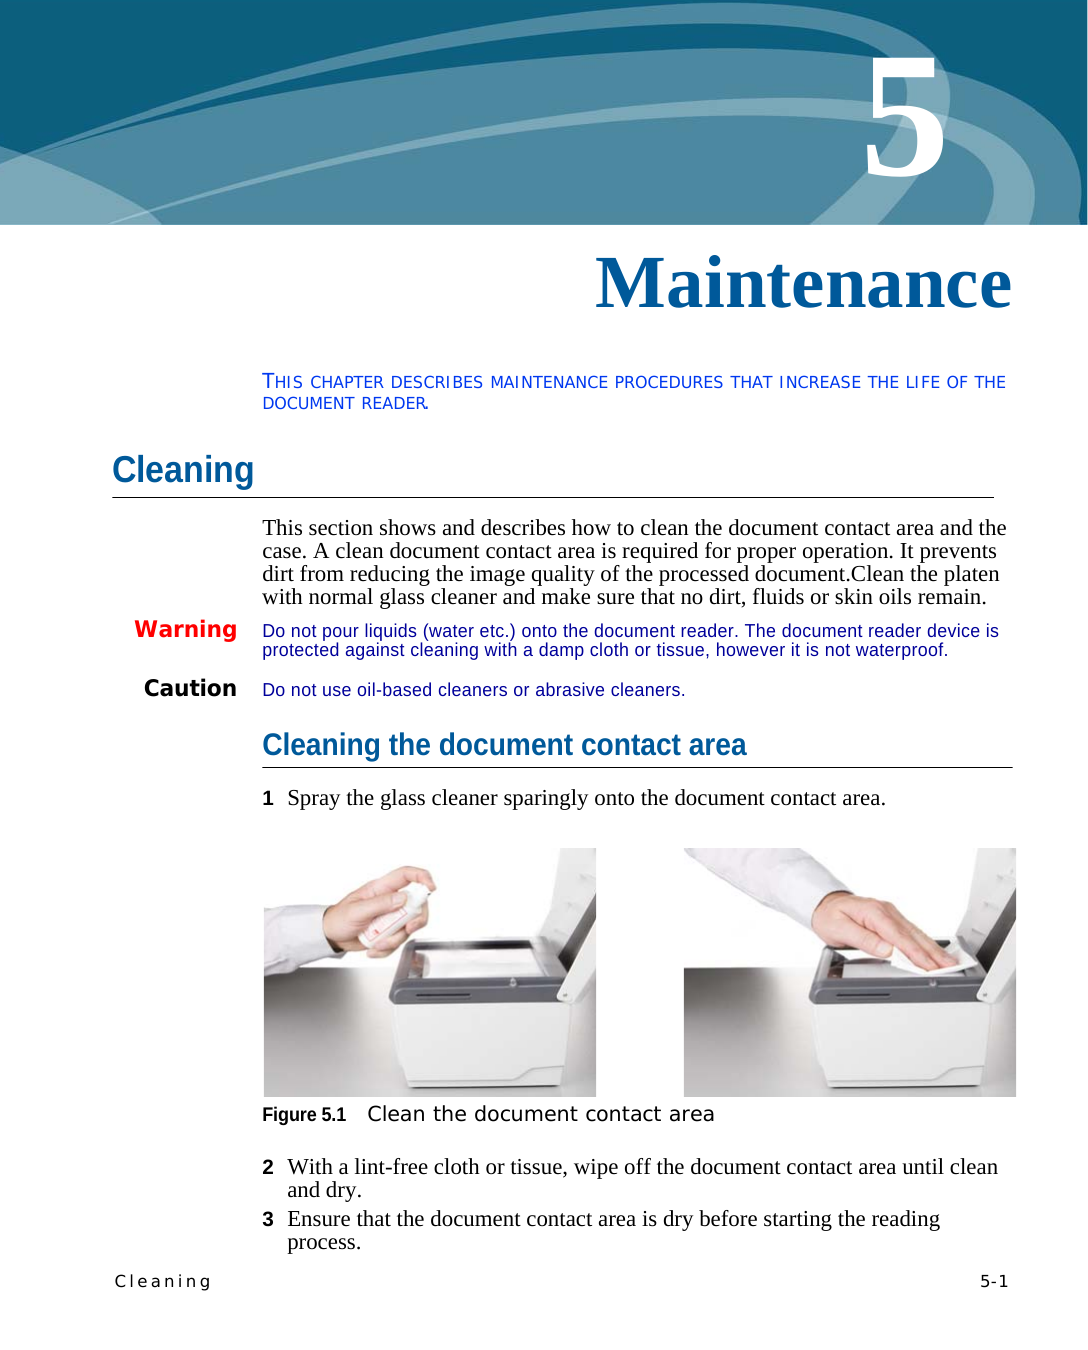 Cleaning   5-15Chapter 0MaintenanceTHIS CHAPTER DESCRIBES MAINTENANCE PROCEDURES THAT INCREASE THE LIFE OF THE DOCUMENT READER.CleaningThis section shows and describes how to clean the document contact area and the case. A clean document contact area is required for proper operation. It prevents dirt from reducing the image quality of the processed document.Clean the platen with normal glass cleaner and make sure that no dirt, fluids or skin oils remain.WarningDo not pour liquids (water etc.) onto the document reader. The document reader device is protected against cleaning with a damp cloth or tissue, however it is not waterproof.CautionDo not use oil-based cleaners or abrasive cleaners.Cleaning the document contact area1Spray the glass cleaner sparingly onto the document contact area.Figure 5.1Clean the document contact area2With a lint-free cloth or tissue, wipe off the document contact area until clean and dry.3Ensure that the document contact area is dry before starting the reading process.